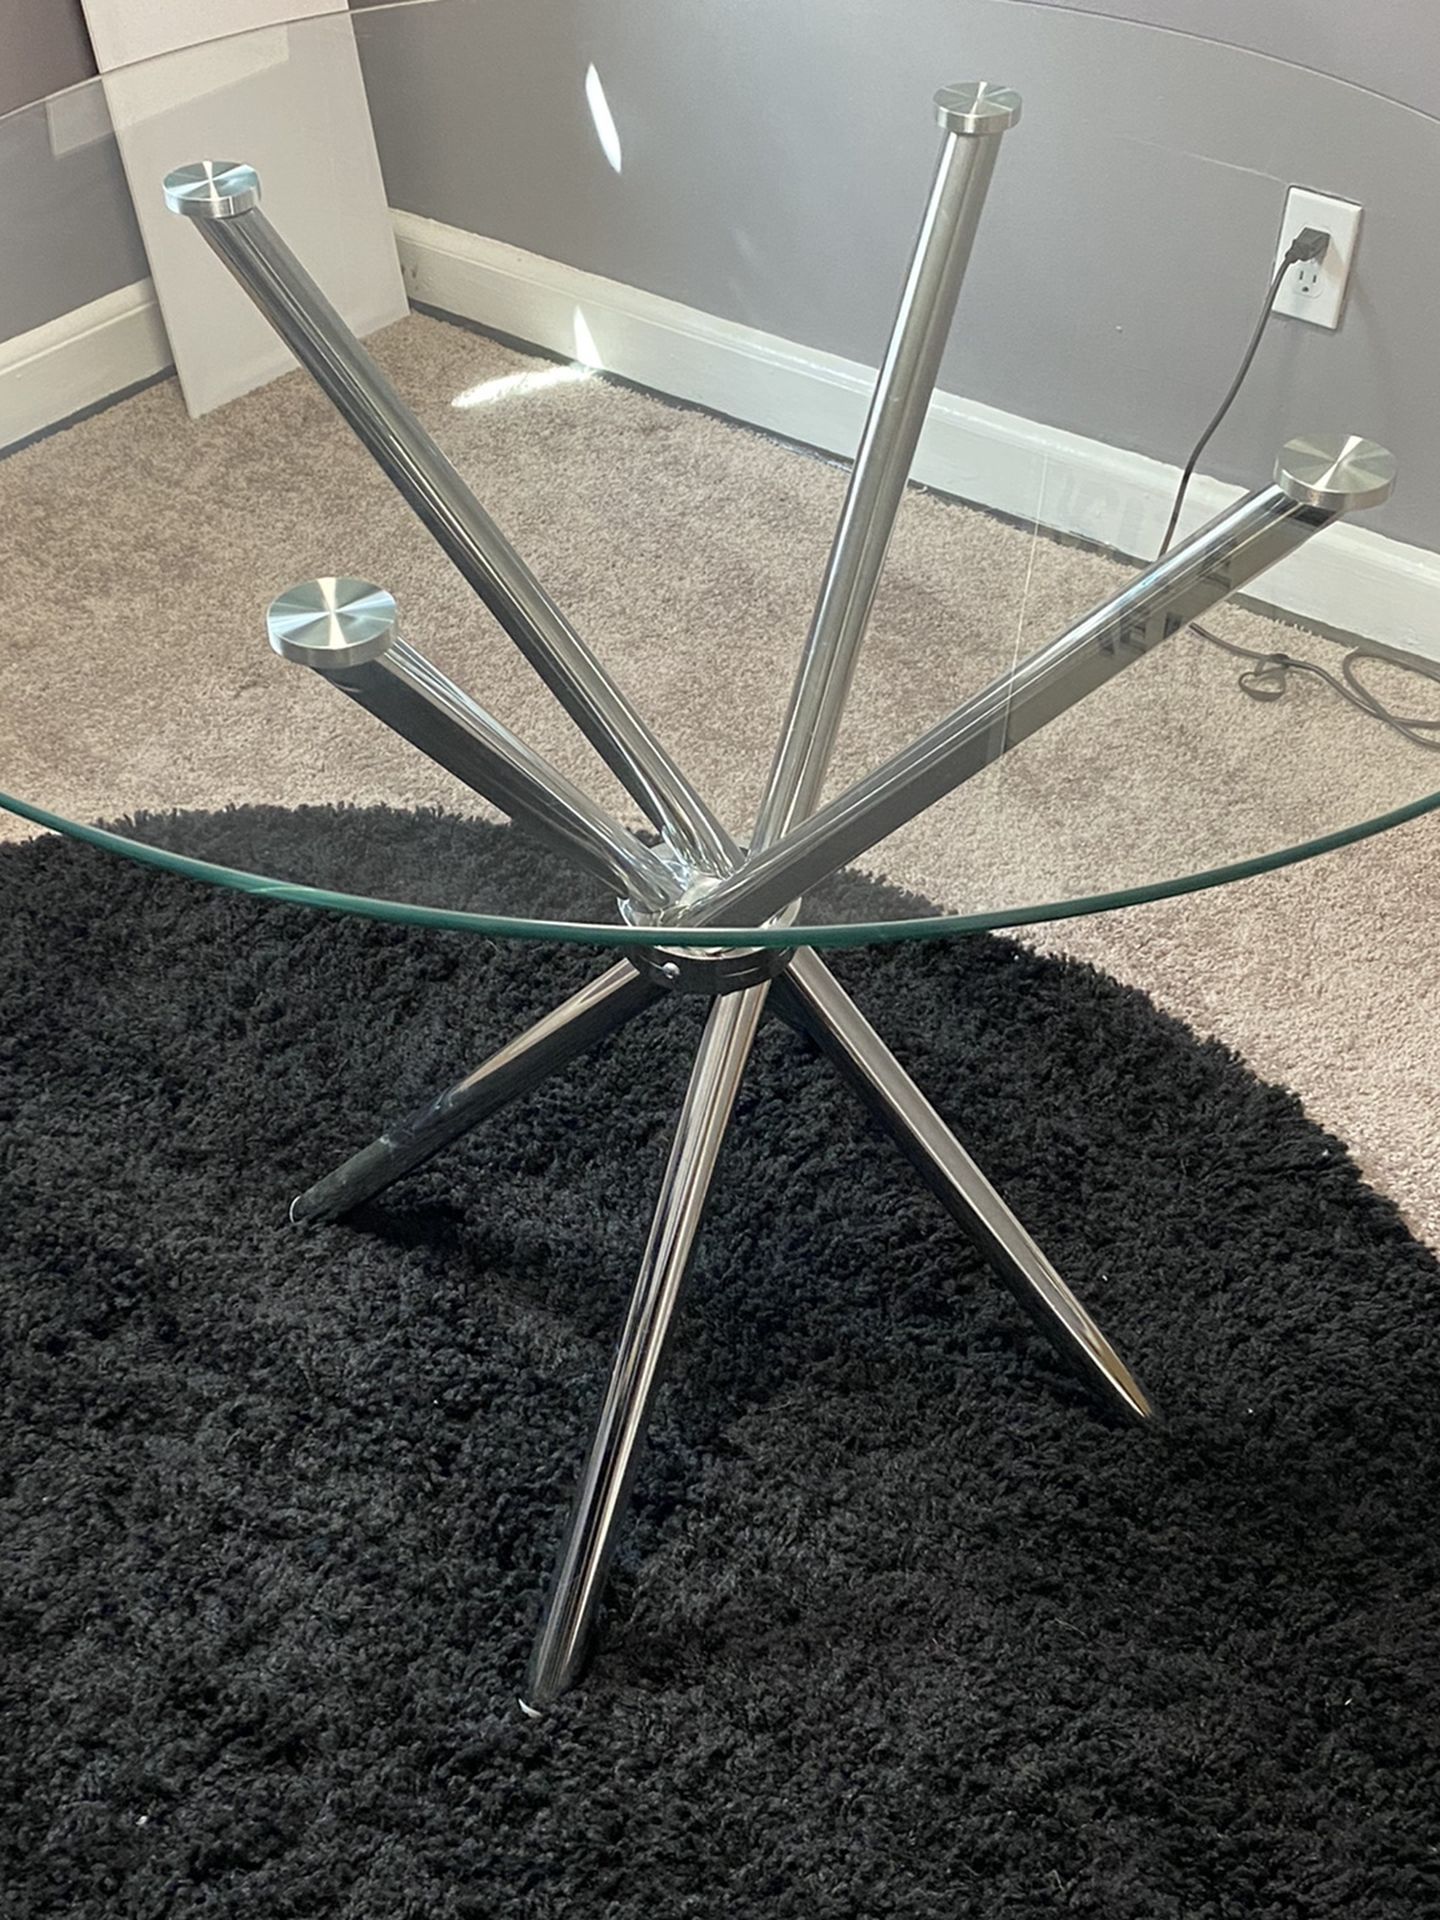 Contemporary Modern Table For Sale!